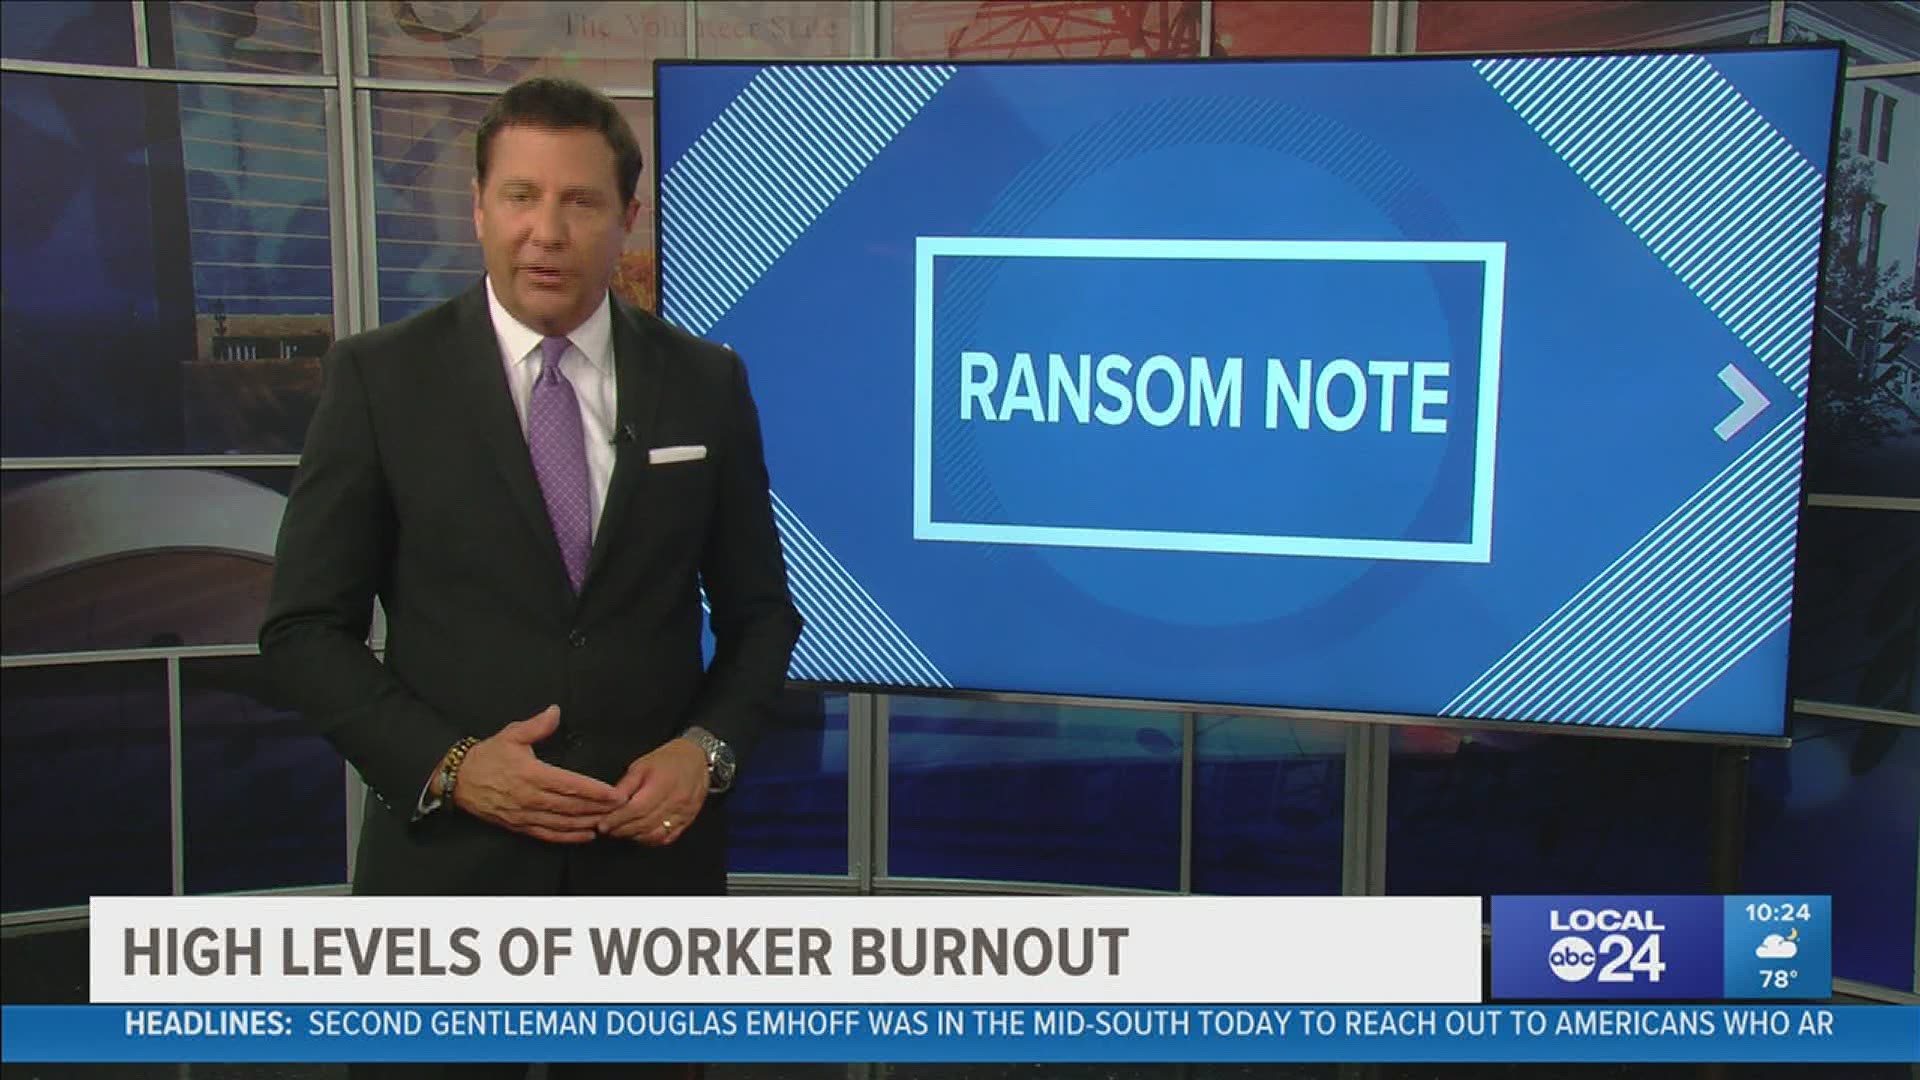 “If employers are frustrated now, just wait, because for the first time in decades, workers have the upper hand,” said Local 24 News anchor Richard Ransom.